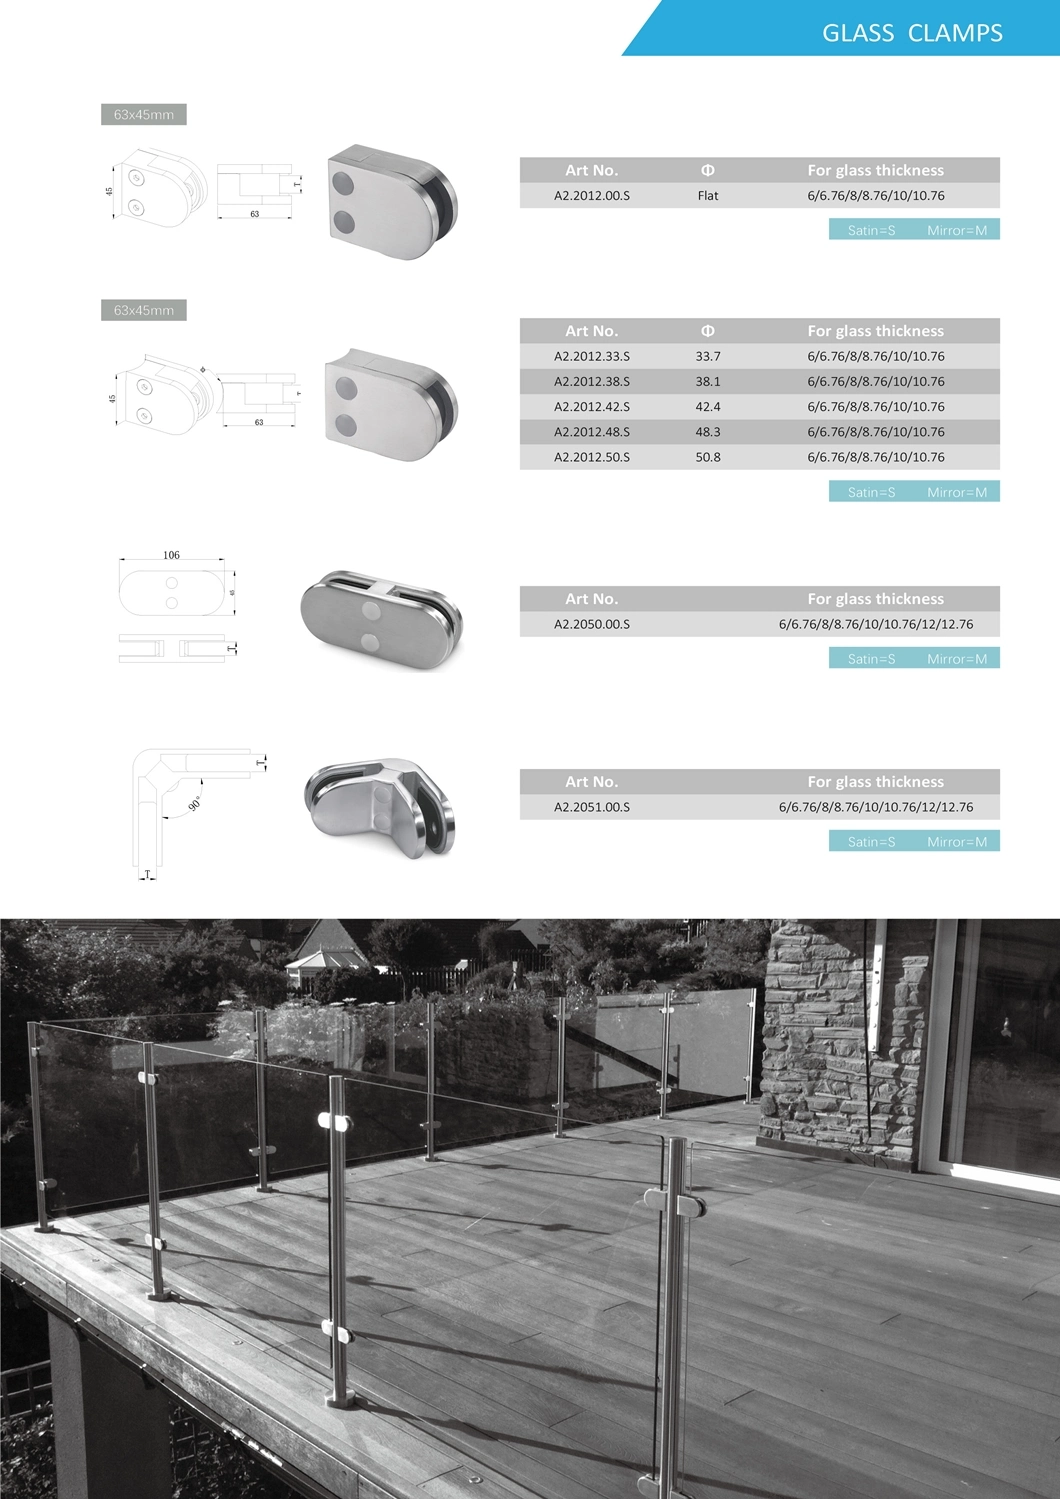 China OEM Factory Stainless Steel Stair Railing for Exterior Balustrade